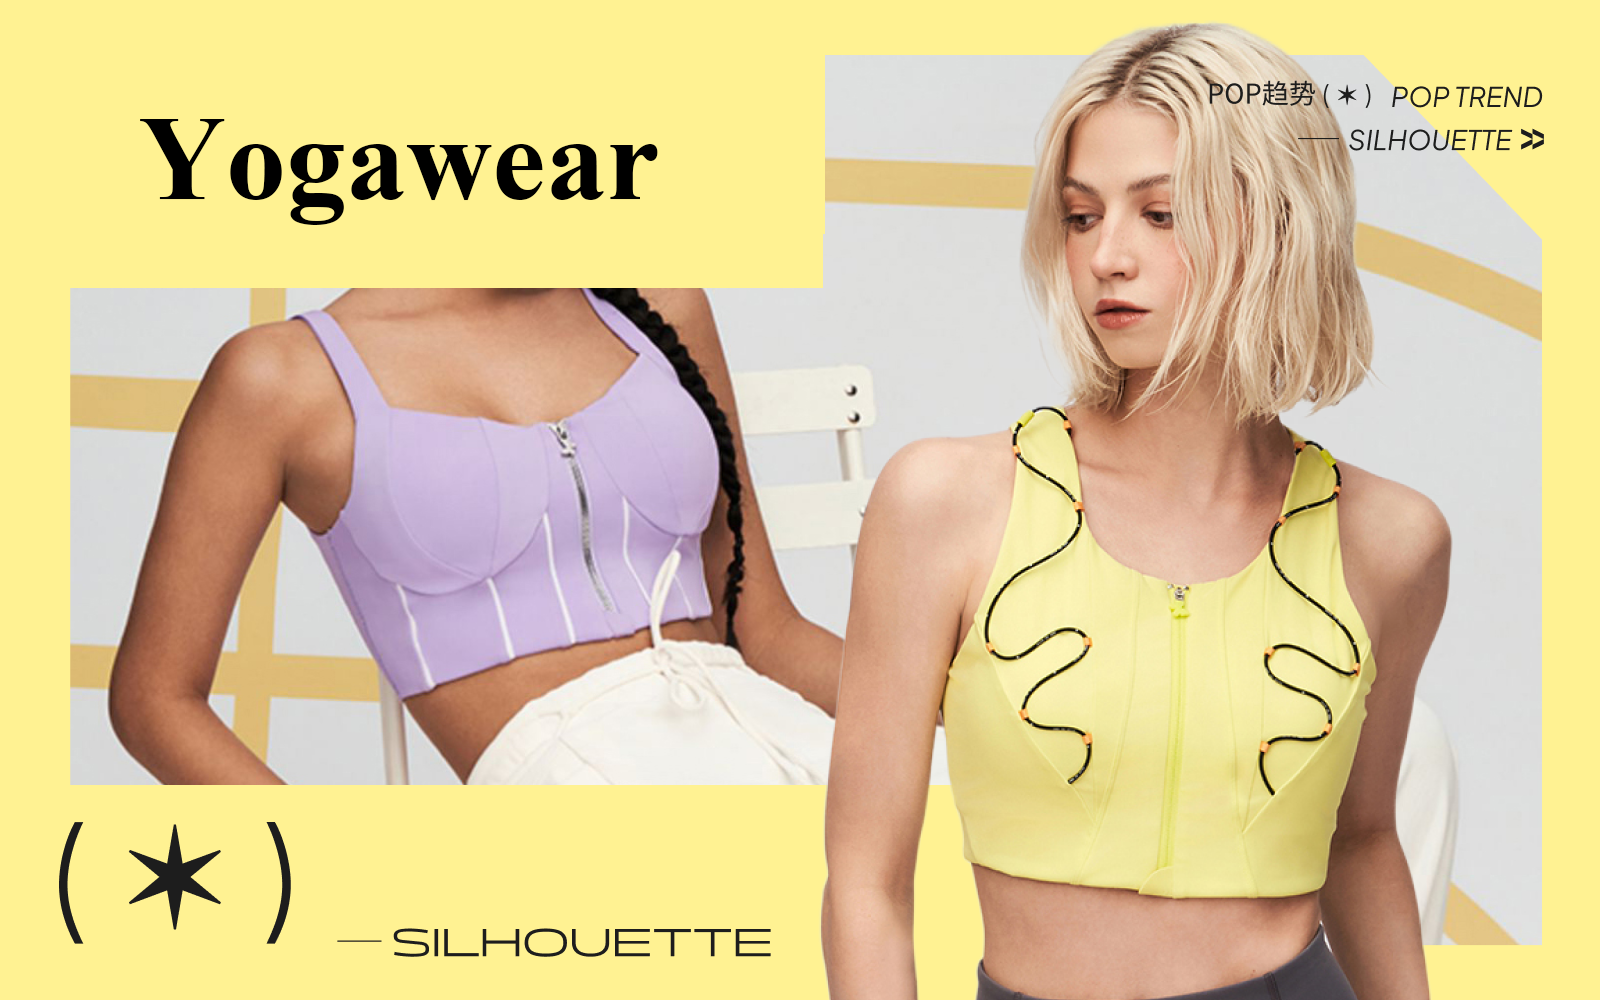 Elegant Shaping -- The Silhouette Trend for Yogawear